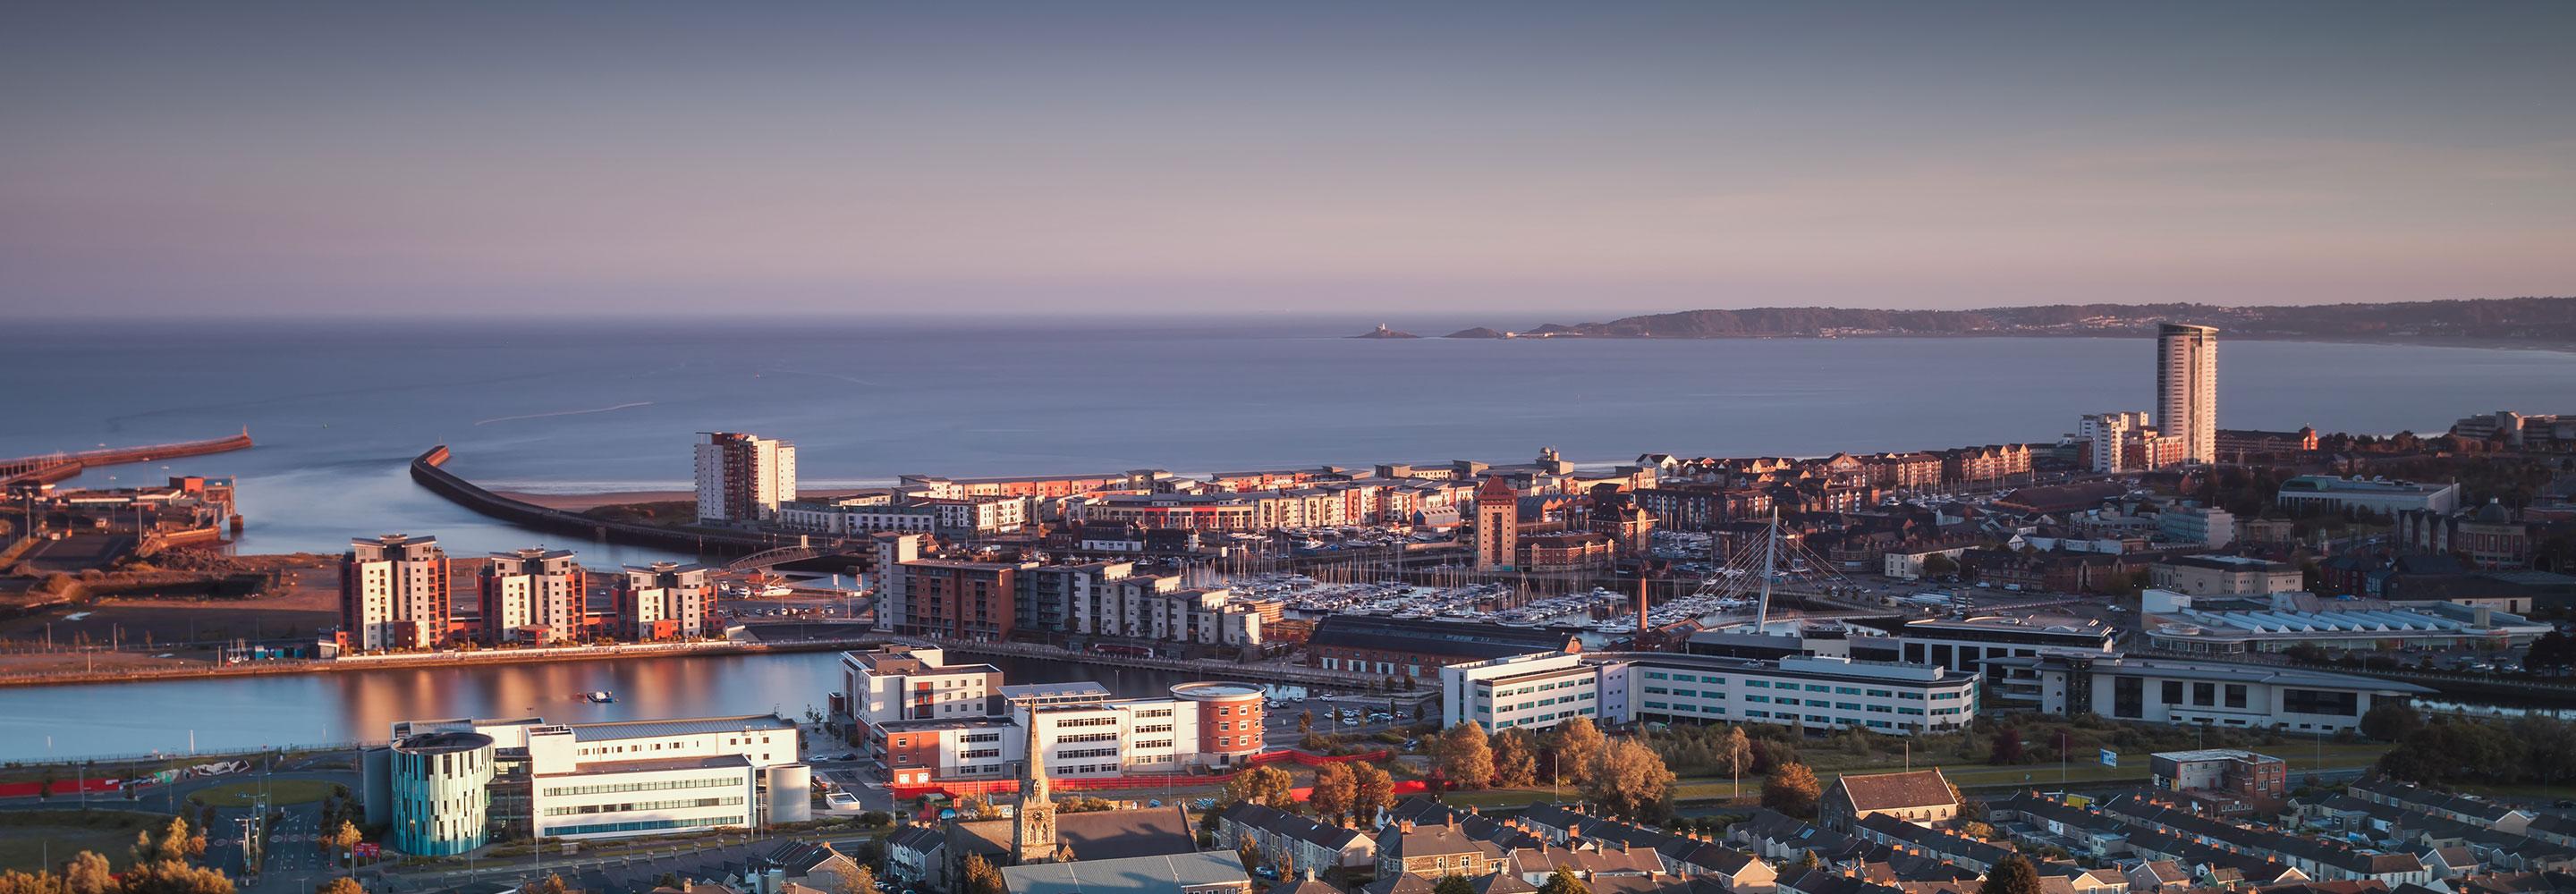 View of Swansea Bay